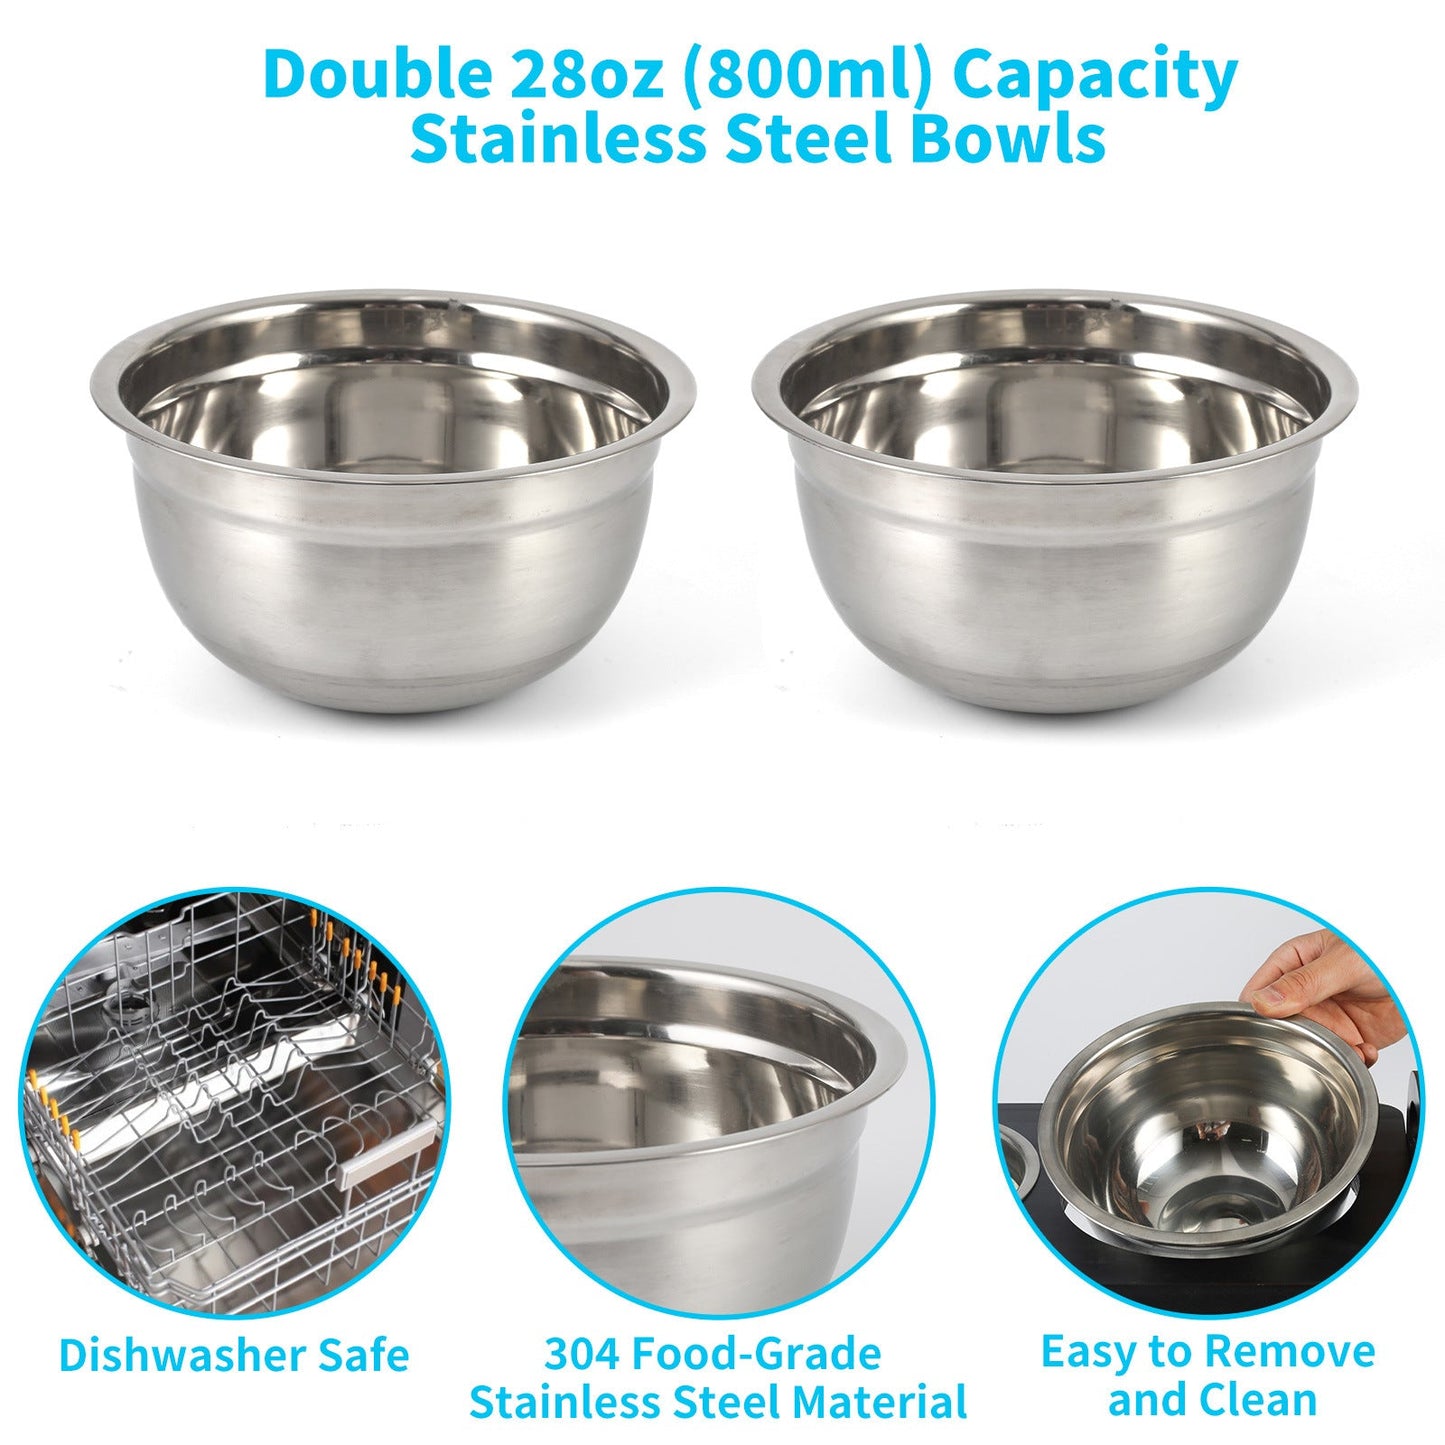 Elevated Dog Bowls for Medium, Large, sized Dogs, Adjustable Heights